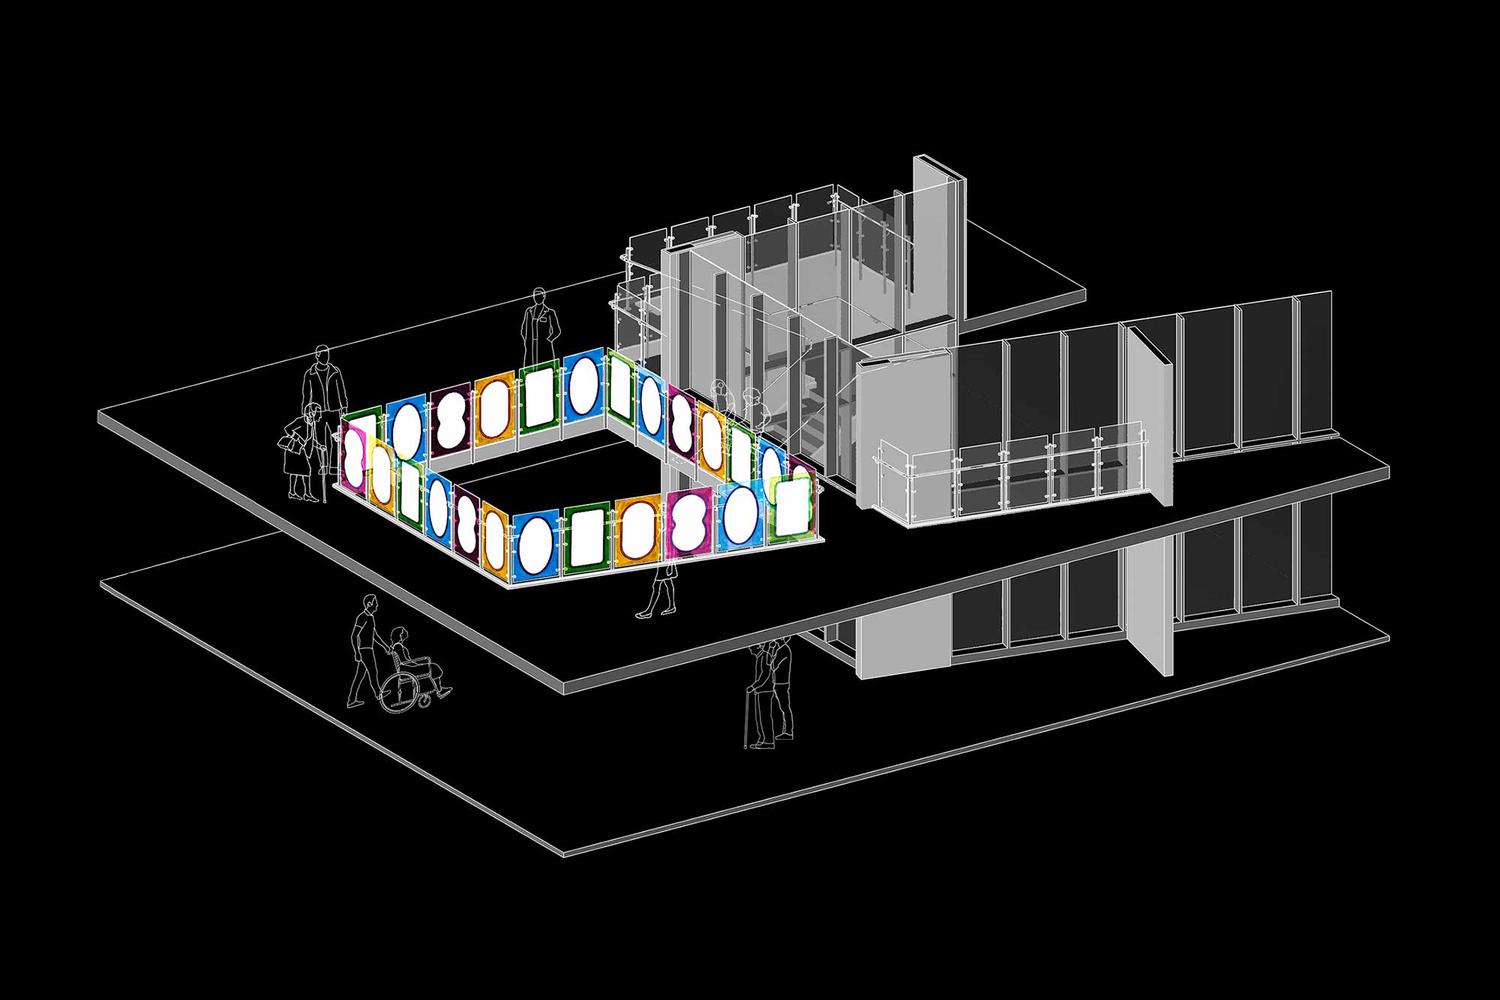 Black and white architectural isometric diagram of colorful panels on a balaustrade